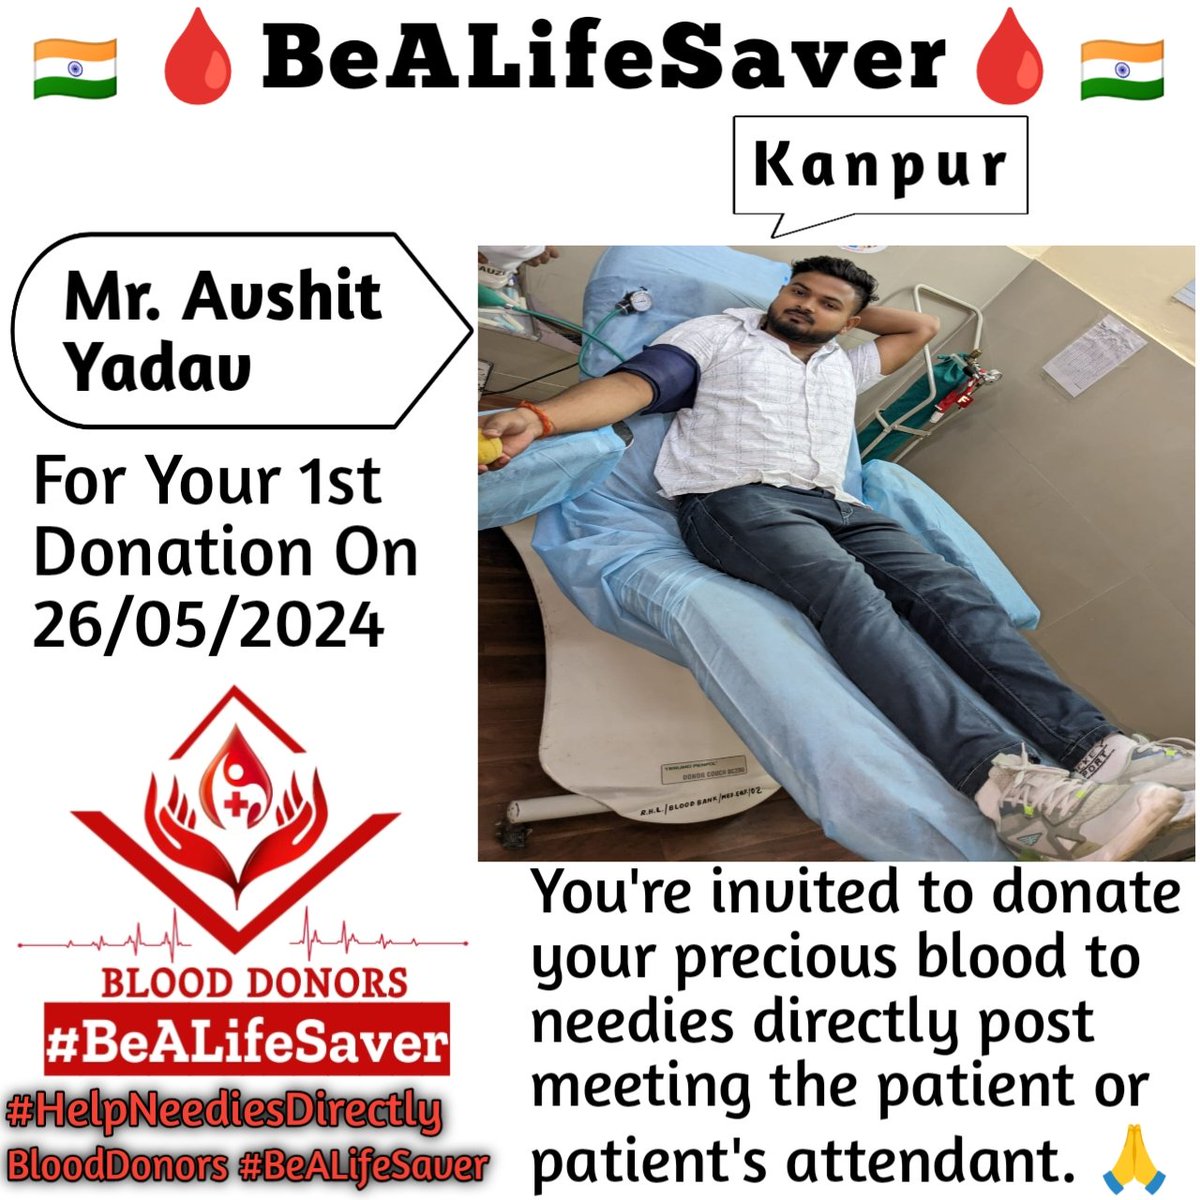 🙏 Congratulations Debutant 🙏 Today's hero, Mr. Avshit Yadav Ji, donated blood in Kanpur for the 1st time to help a patient in need. Heartfelt gratitude and respect for his selfless act. *HUMANITY SHOULD BE OUR RACE, LOVE SHOULD BE OUR RELIGION. DONATE BLOOD, SPREAD HAPPINESS.